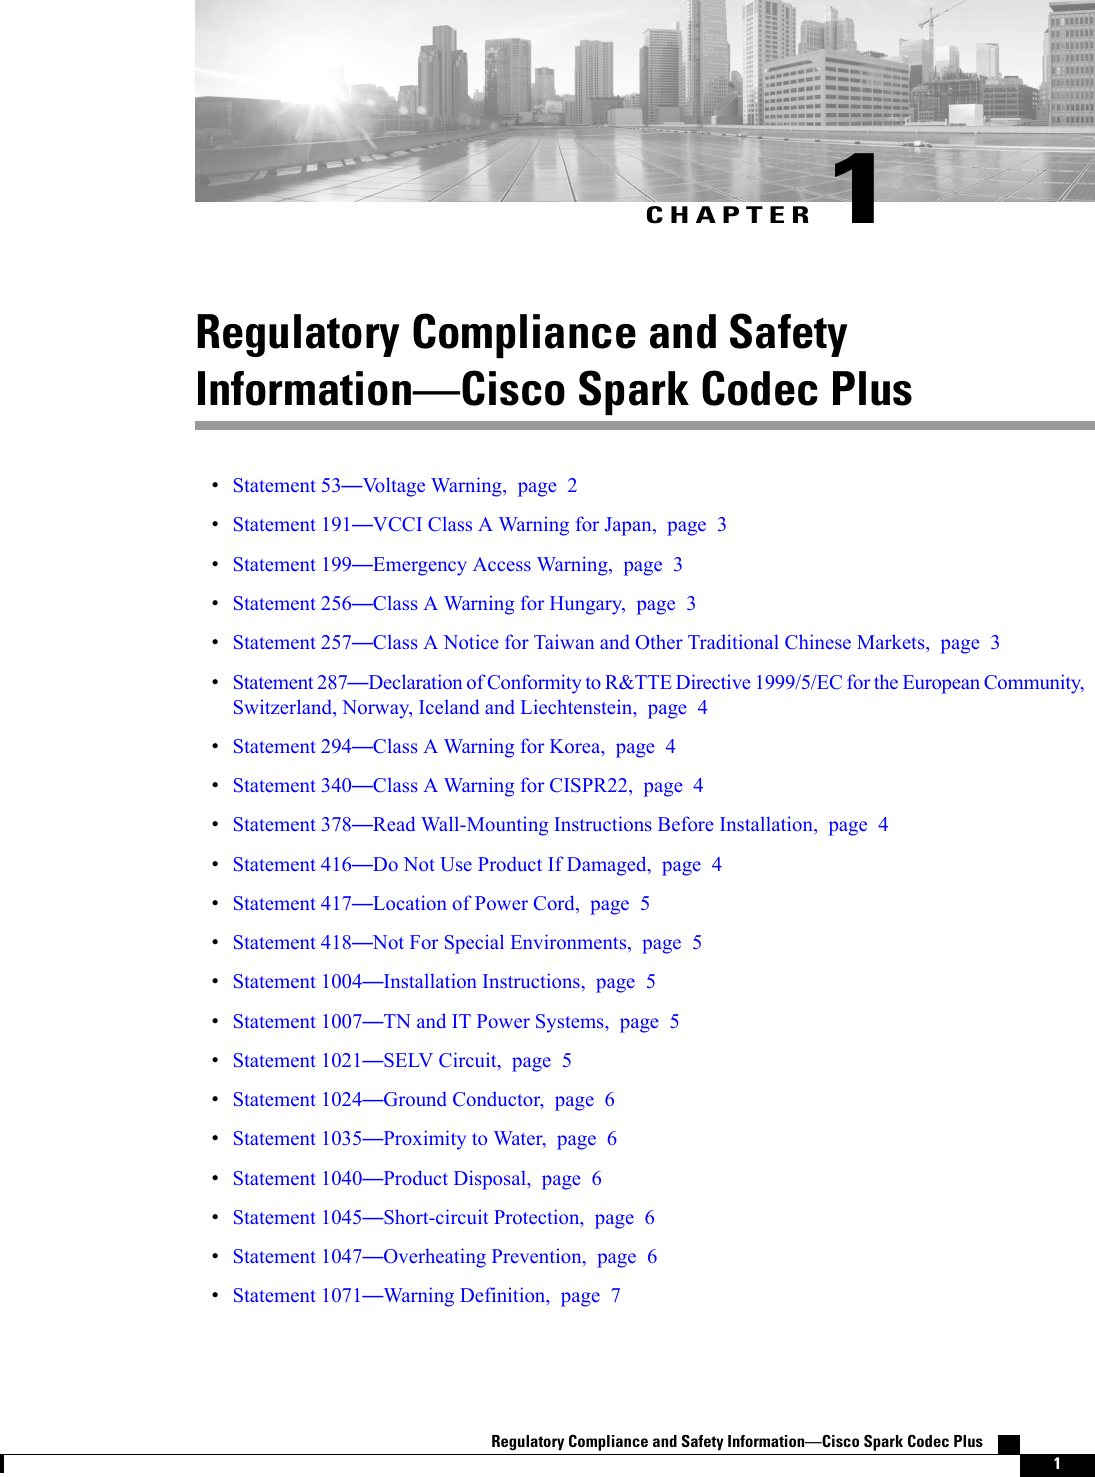 CHAPTER 1Regulatory Compliance and SafetyInformationCisco Spark Codec PlusStatement 53Voltage Warning, page 2Statement 191VCCI Class A Warning for Japan, page 3Statement 199Emergency Access Warning, page 3Statement 256Class A Warning for Hungary, page 3Statement 257Class A Notice for Taiwan and Other Traditional Chinese Markets, page 3Statement 287Declaration of Conformity to R&amp;TTE Directive 1999/5/EC for the European Community,Switzerland, Norway, Iceland and Liechtenstein, page 4Statement 294Class A Warning for Korea, page 4Statement 340Class A Warning for CISPR22, page 4Statement 378Read Wall-Mounting Instructions Before Installation, page 4Statement 416Do Not Use Product If Damaged, page 4Statement 417Location of Power Cord, page 5Statement 418Not For Special Environments, page 5Statement 1004Installation Instructions, page 5Statement 1007TN and IT Power Systems, page 5Statement 1021SELV Circuit, page 5Statement 1024Ground Conductor, page 6Statement 1035Proximity to Water, page 6Statement 1040Product Disposal, page 6Statement 1045Short-circuit Protection, page 6Statement 1047Overheating Prevention, page 6Statement 1071Warning Definition, page 7Regulatory Compliance and Safety InformationCisco Spark Codec Plus    1